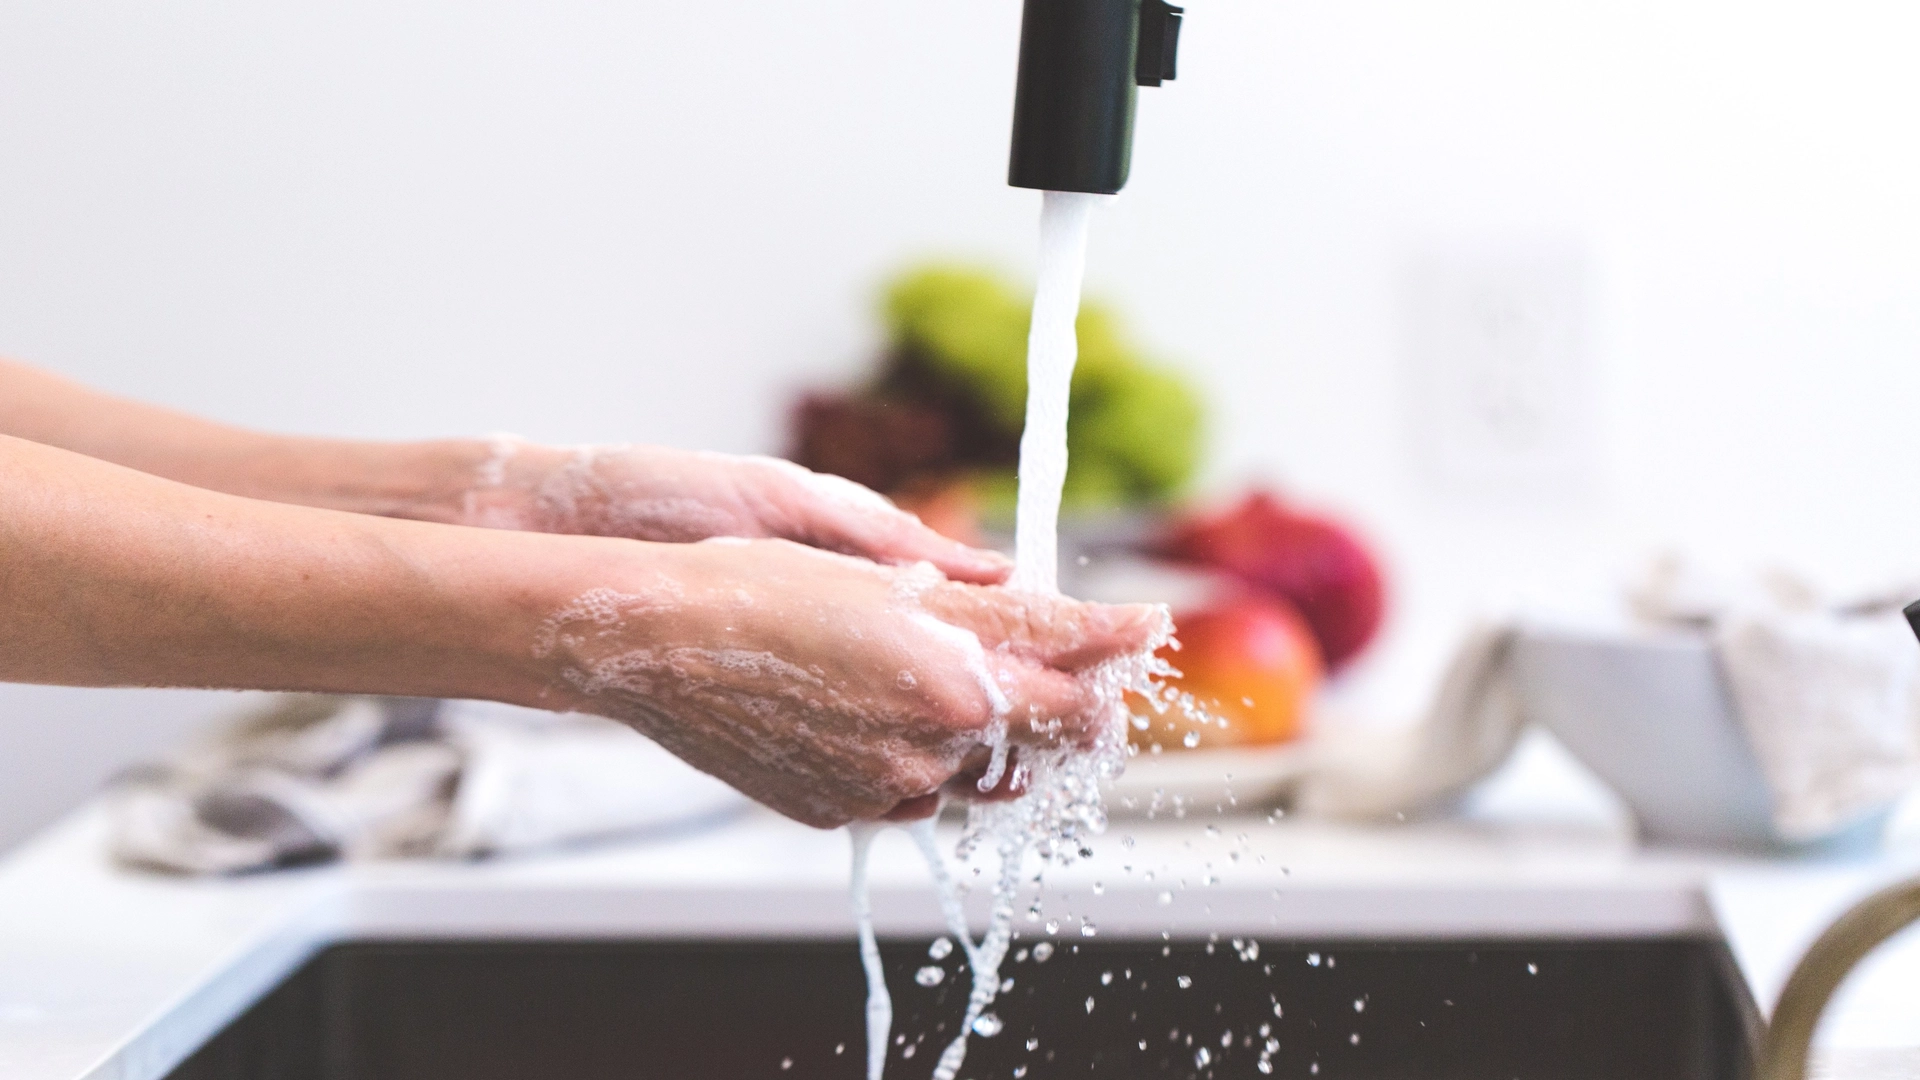 Clean your hands for clean kitchen